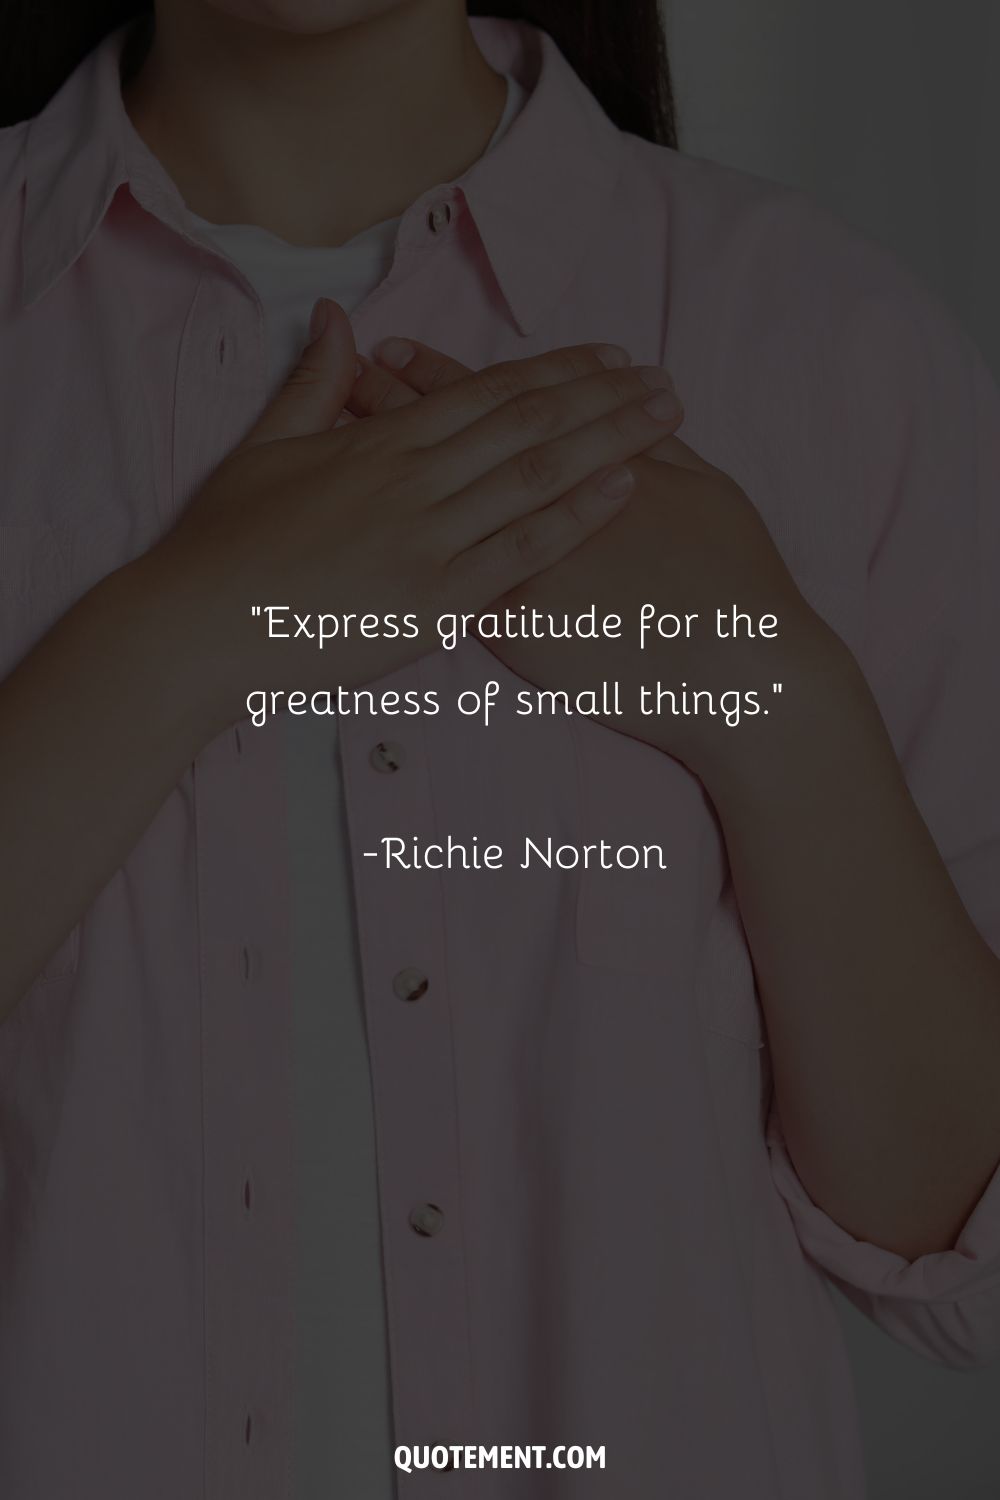 Express gratitude for the greatness of small things.